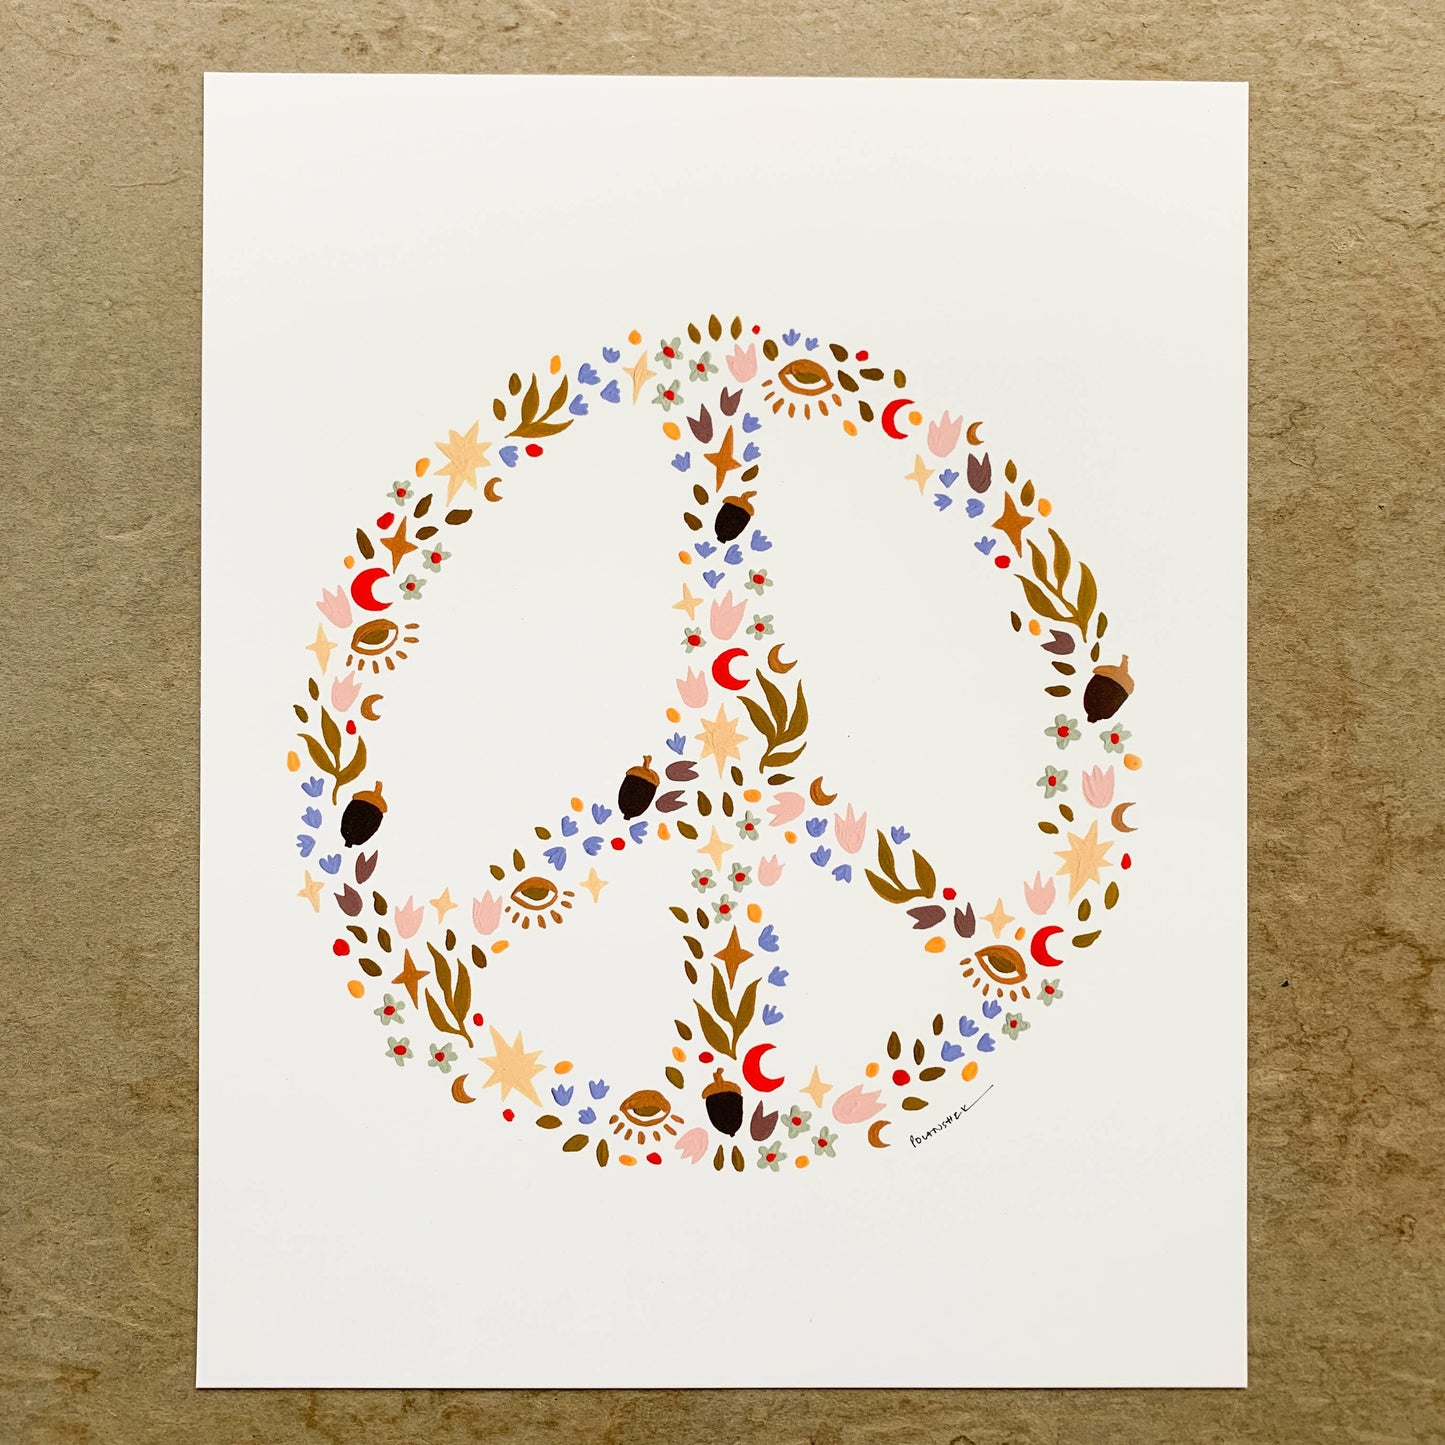 8"x10" Print - Peace: Forest